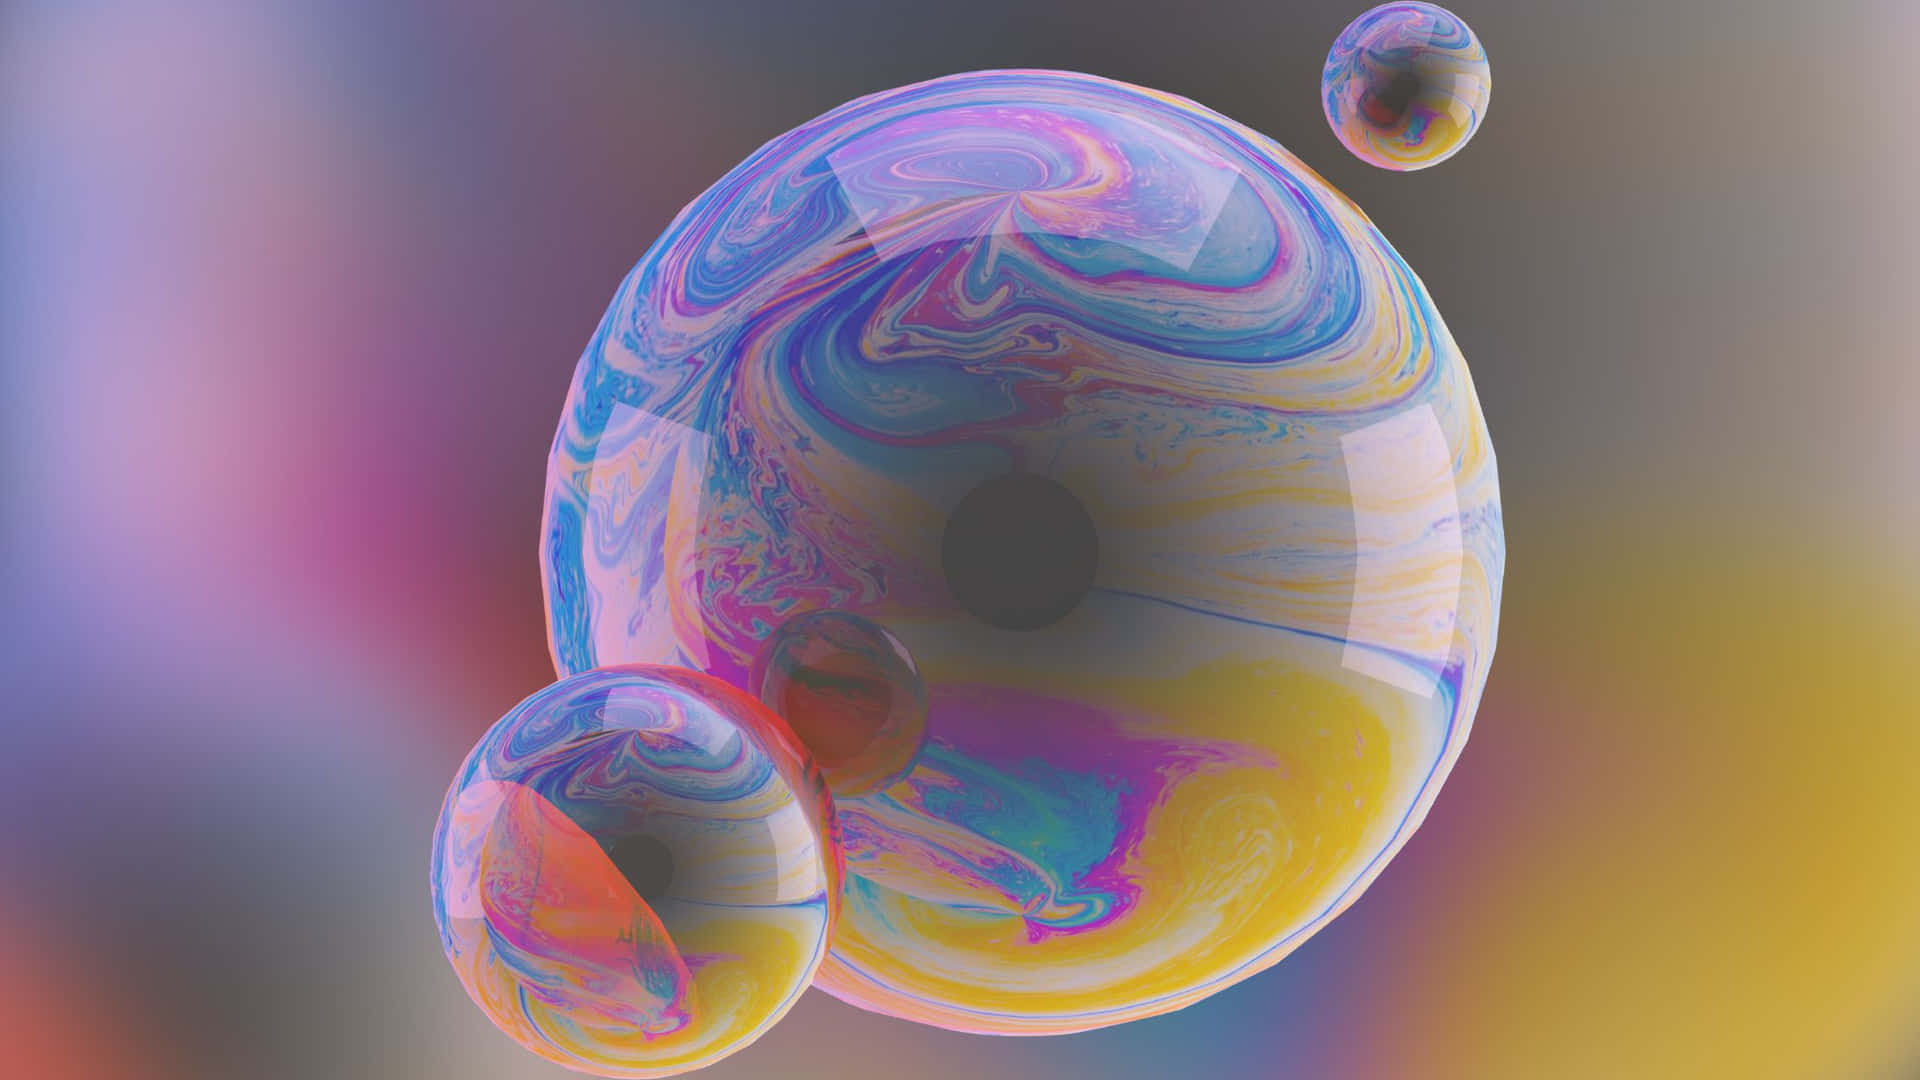 a colorful swirl of soap bubbles on a background Wallpaper